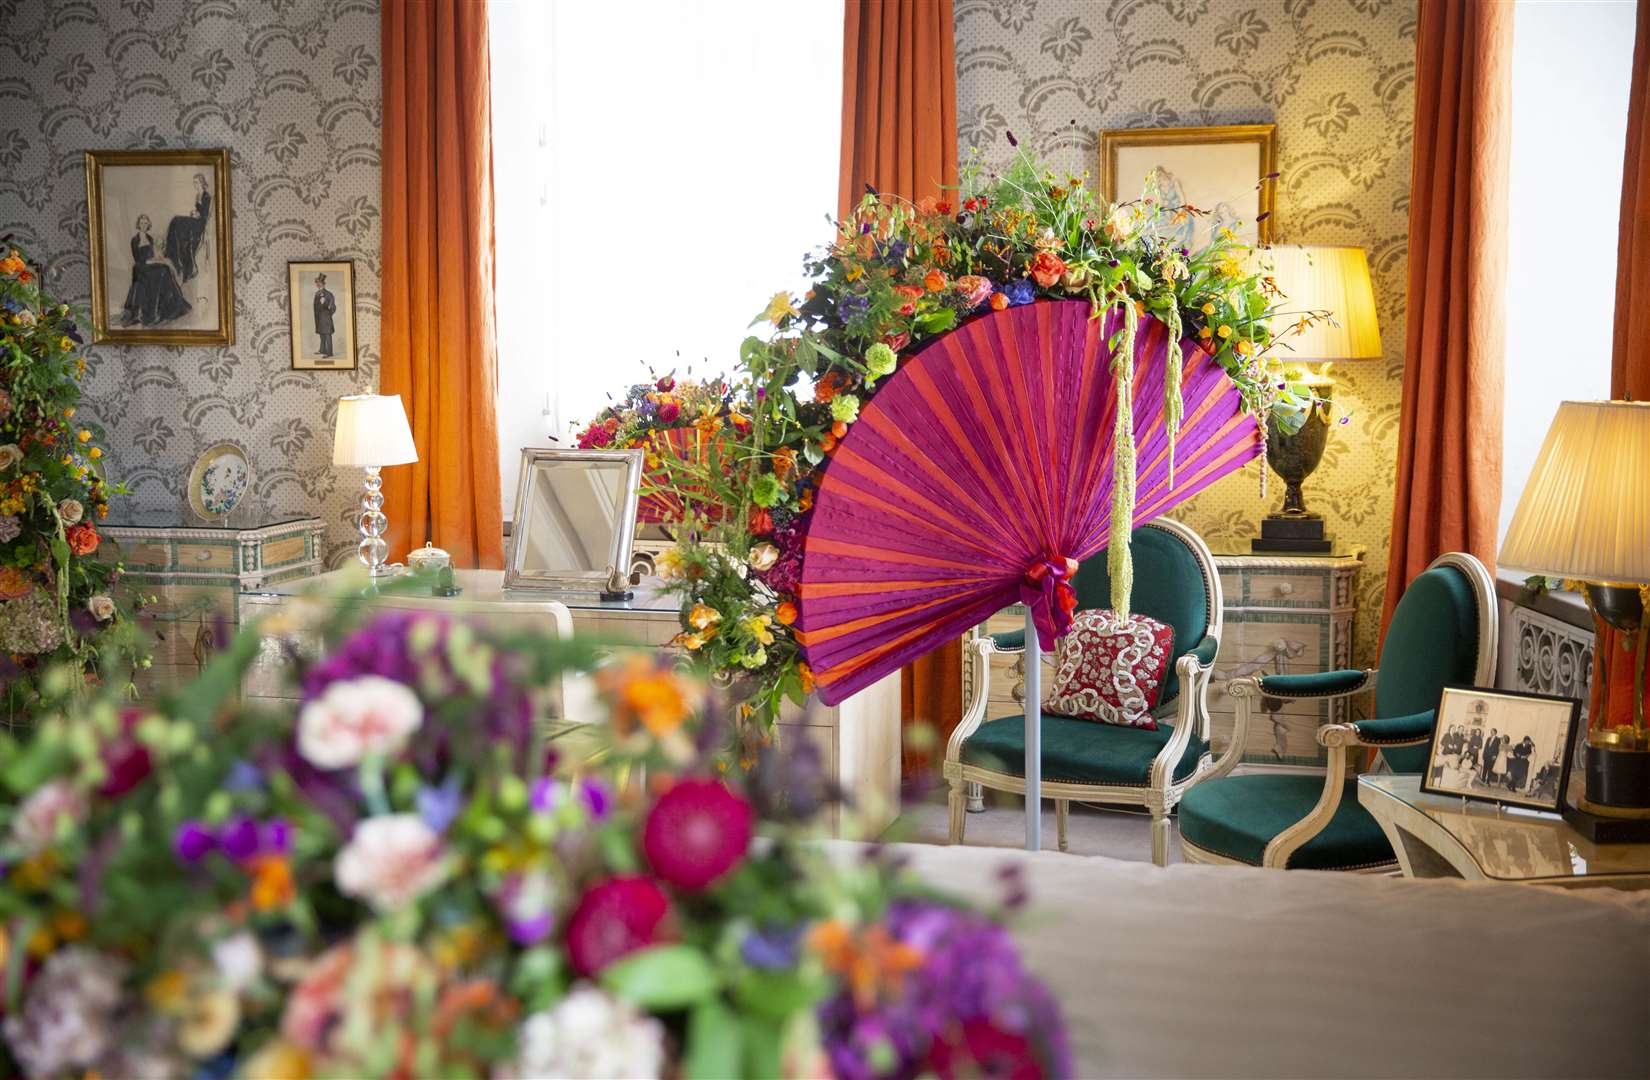 The Leeds castle Festival of Flowers starts this weekend